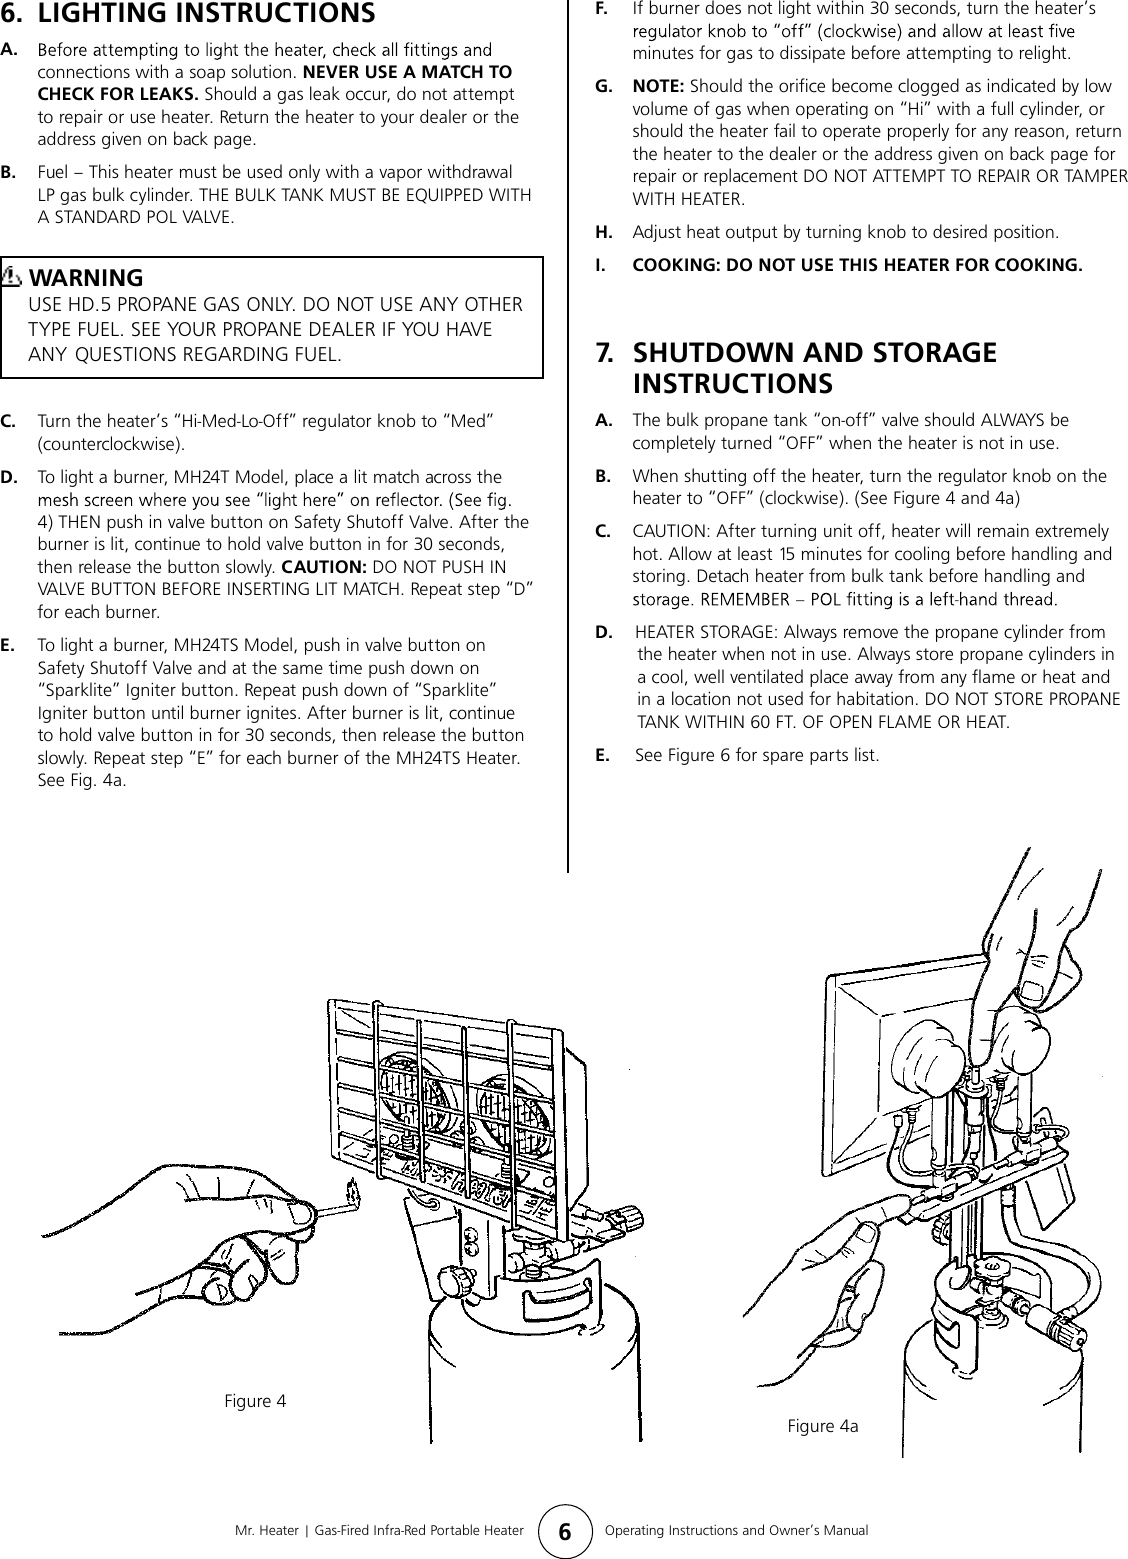 Page 6 of 8 - Mr-Heater Mr-Heater-Mh24T-Users-Manual- MH24T_US_mar_27  Mr-heater-mh24t-users-manual